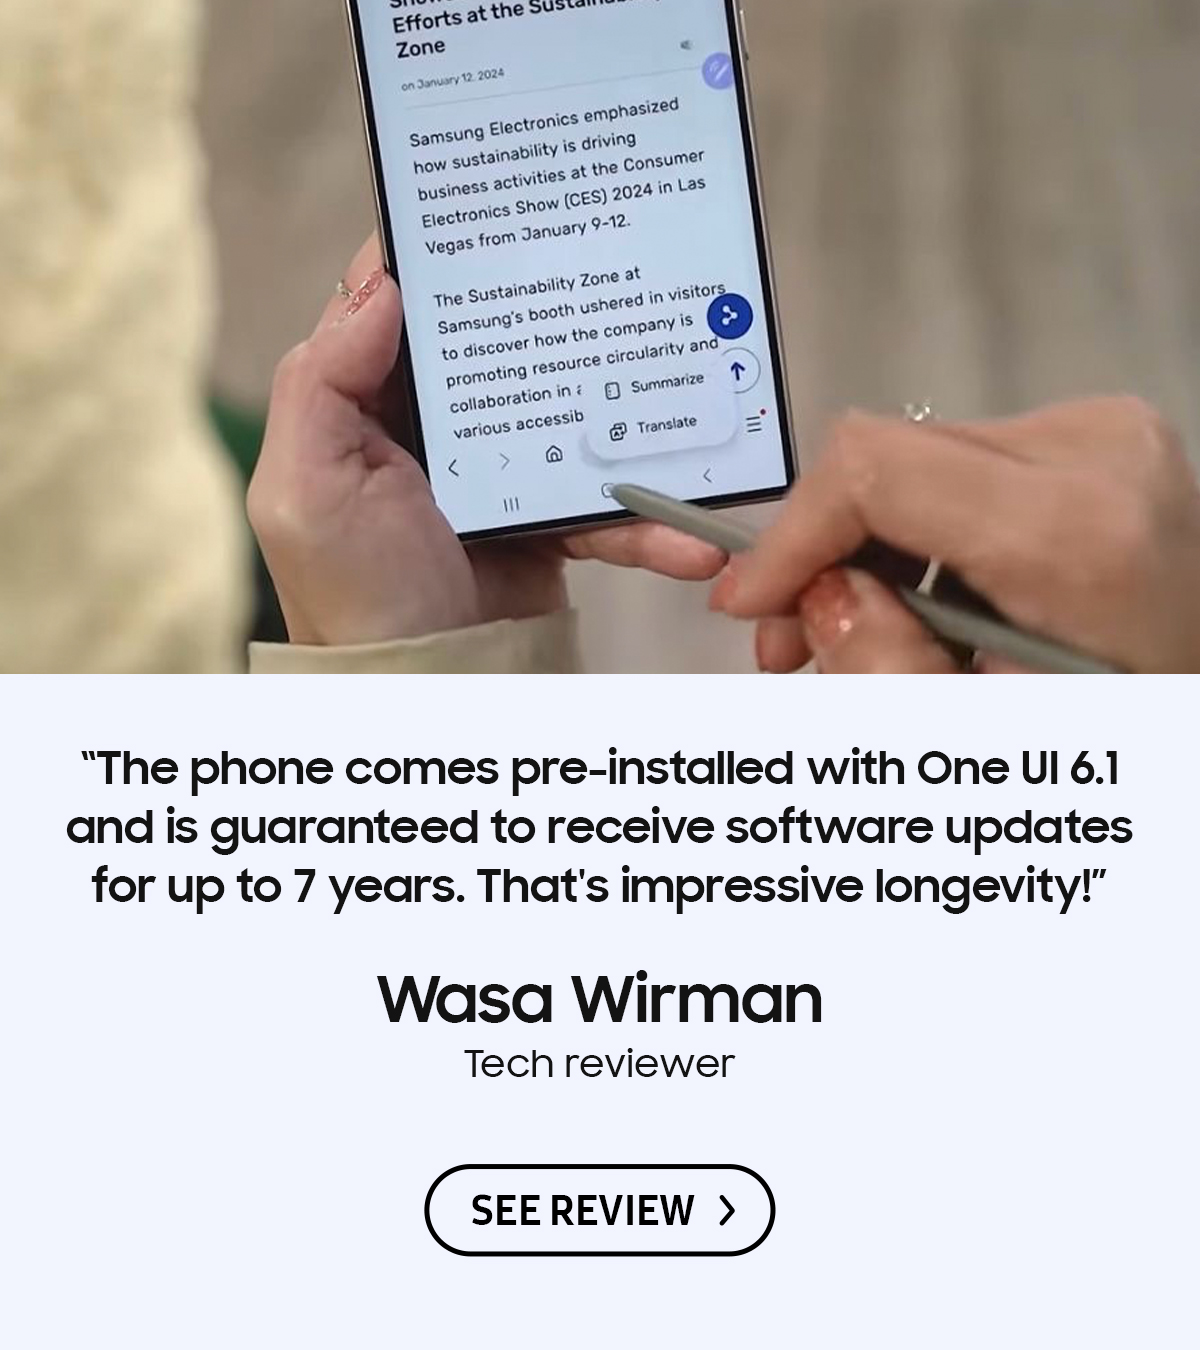 "The phone comes pre-installed with One Ul 6.1 and is guaranteed to receive software updates for up to 7 years. That's impressive longevity!" - Wasa Wirman the Tech reviewer